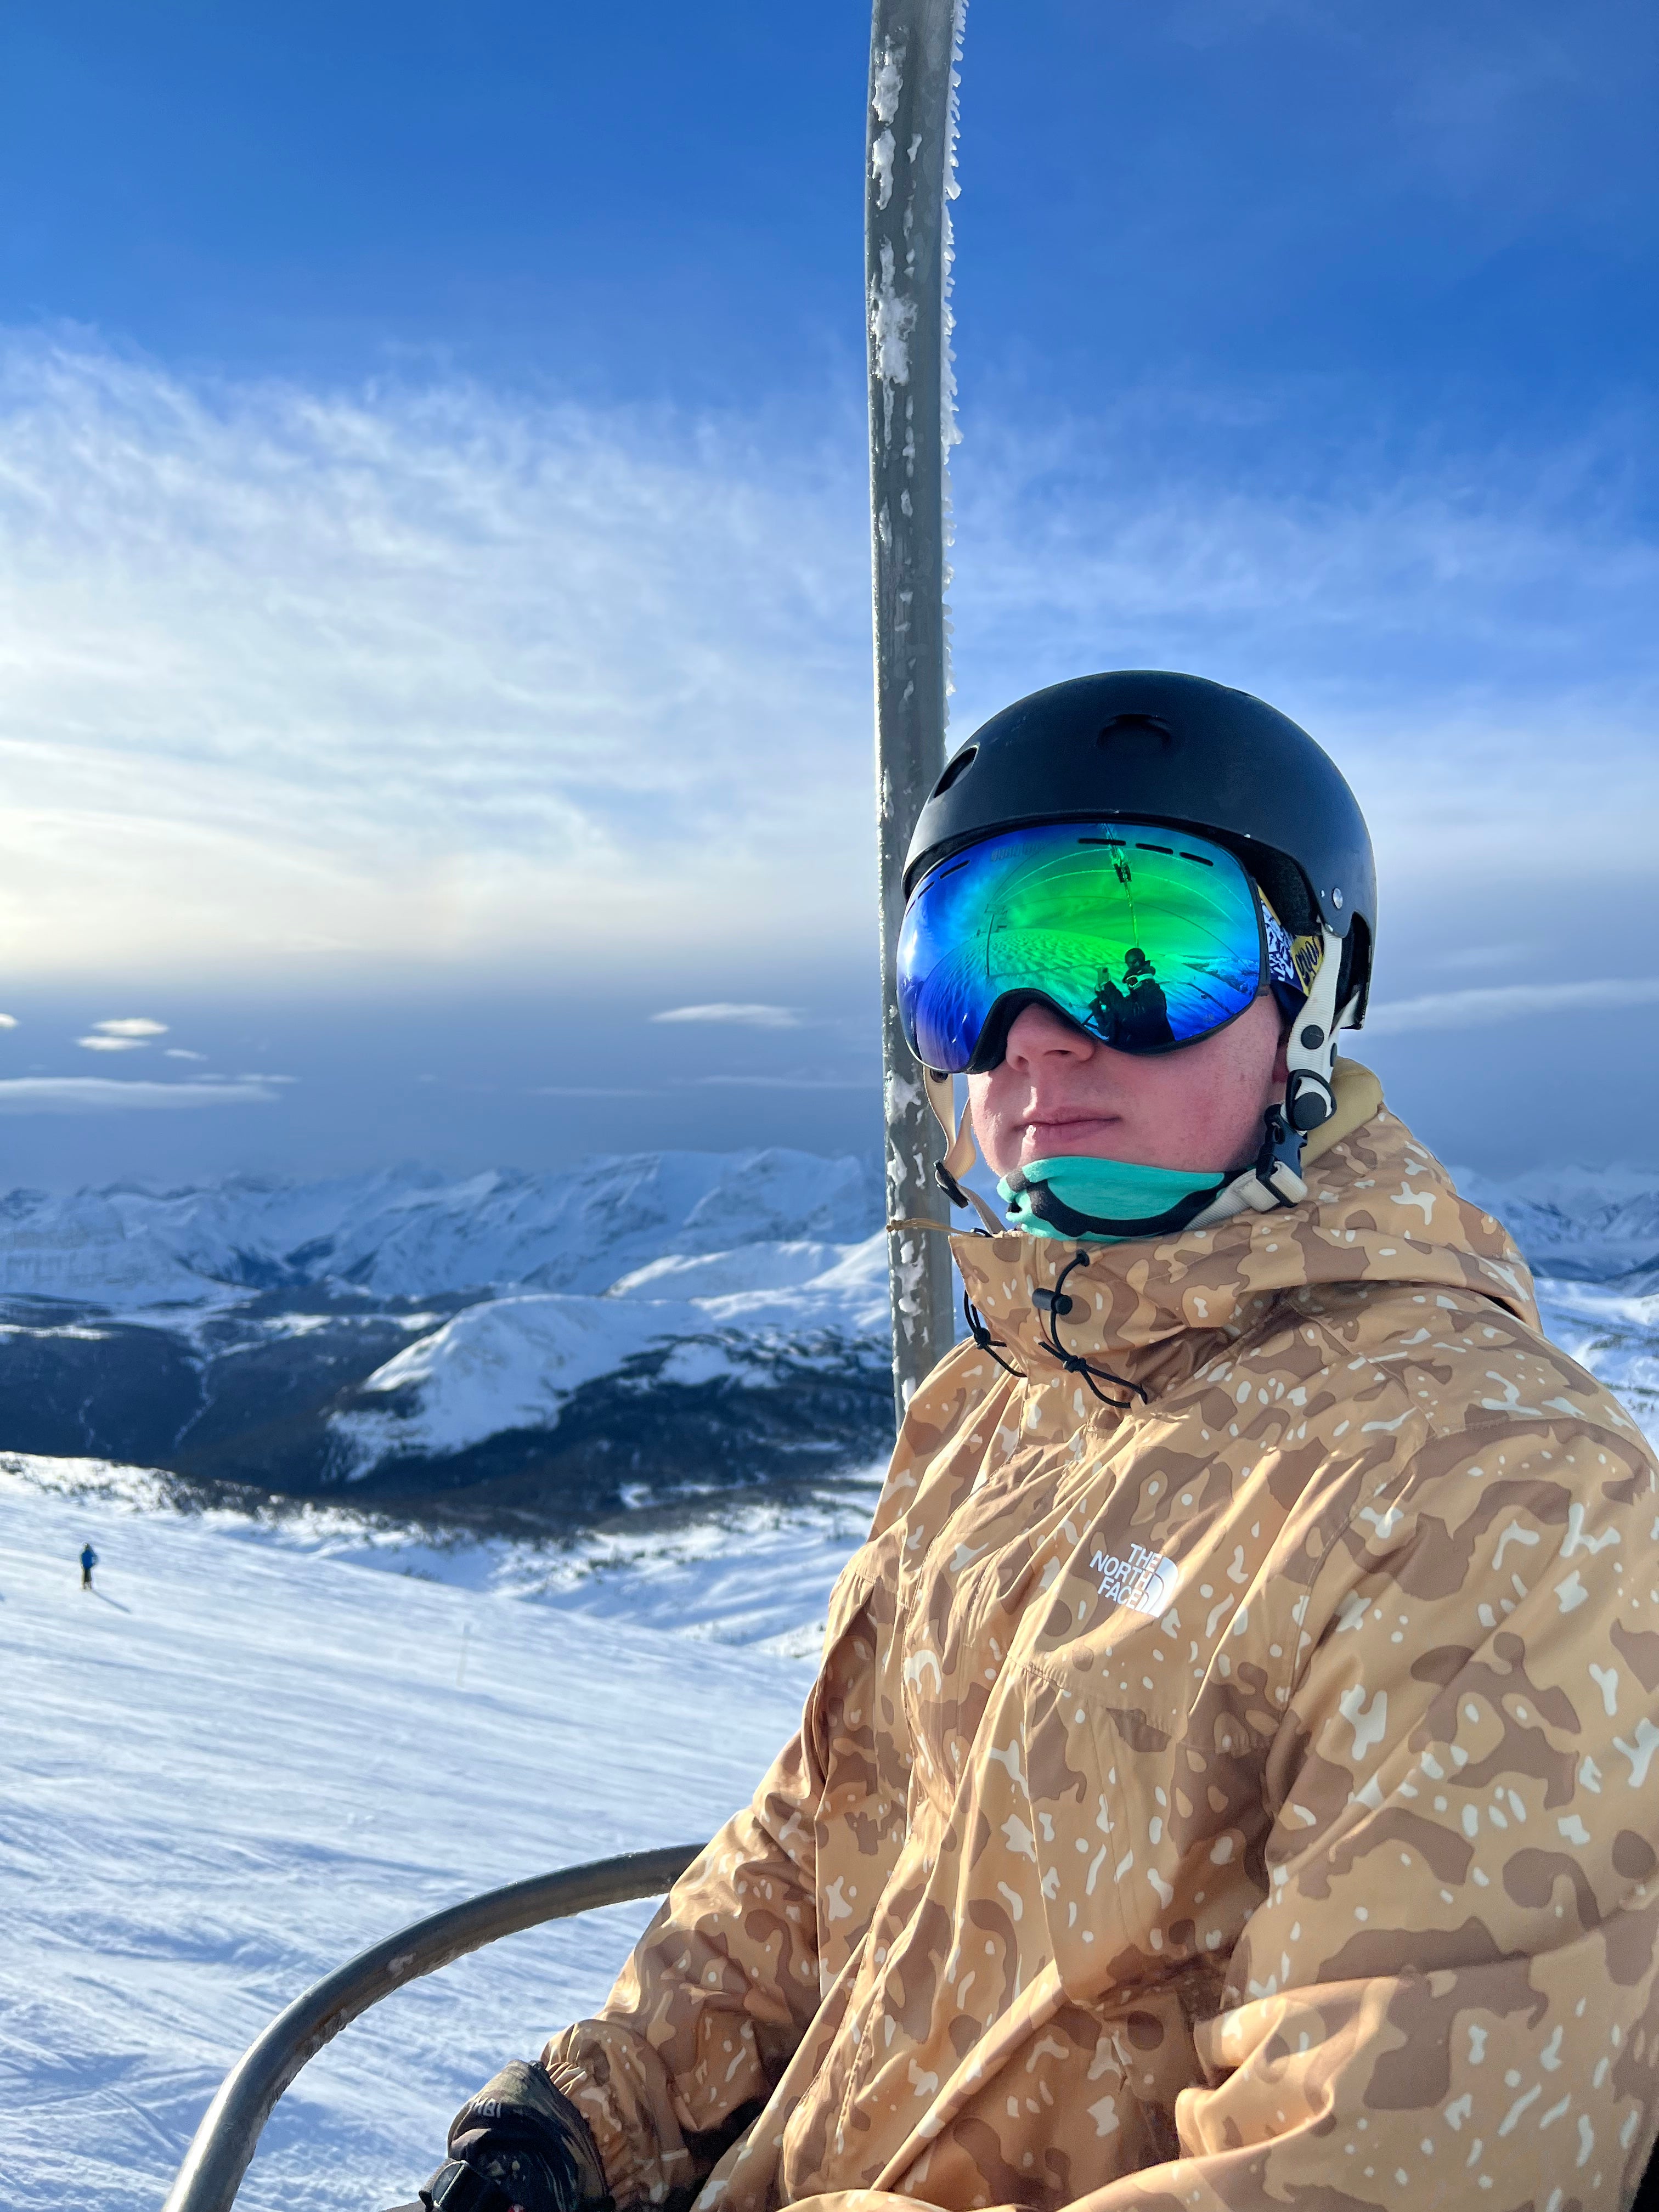 photo of skier on chair lift